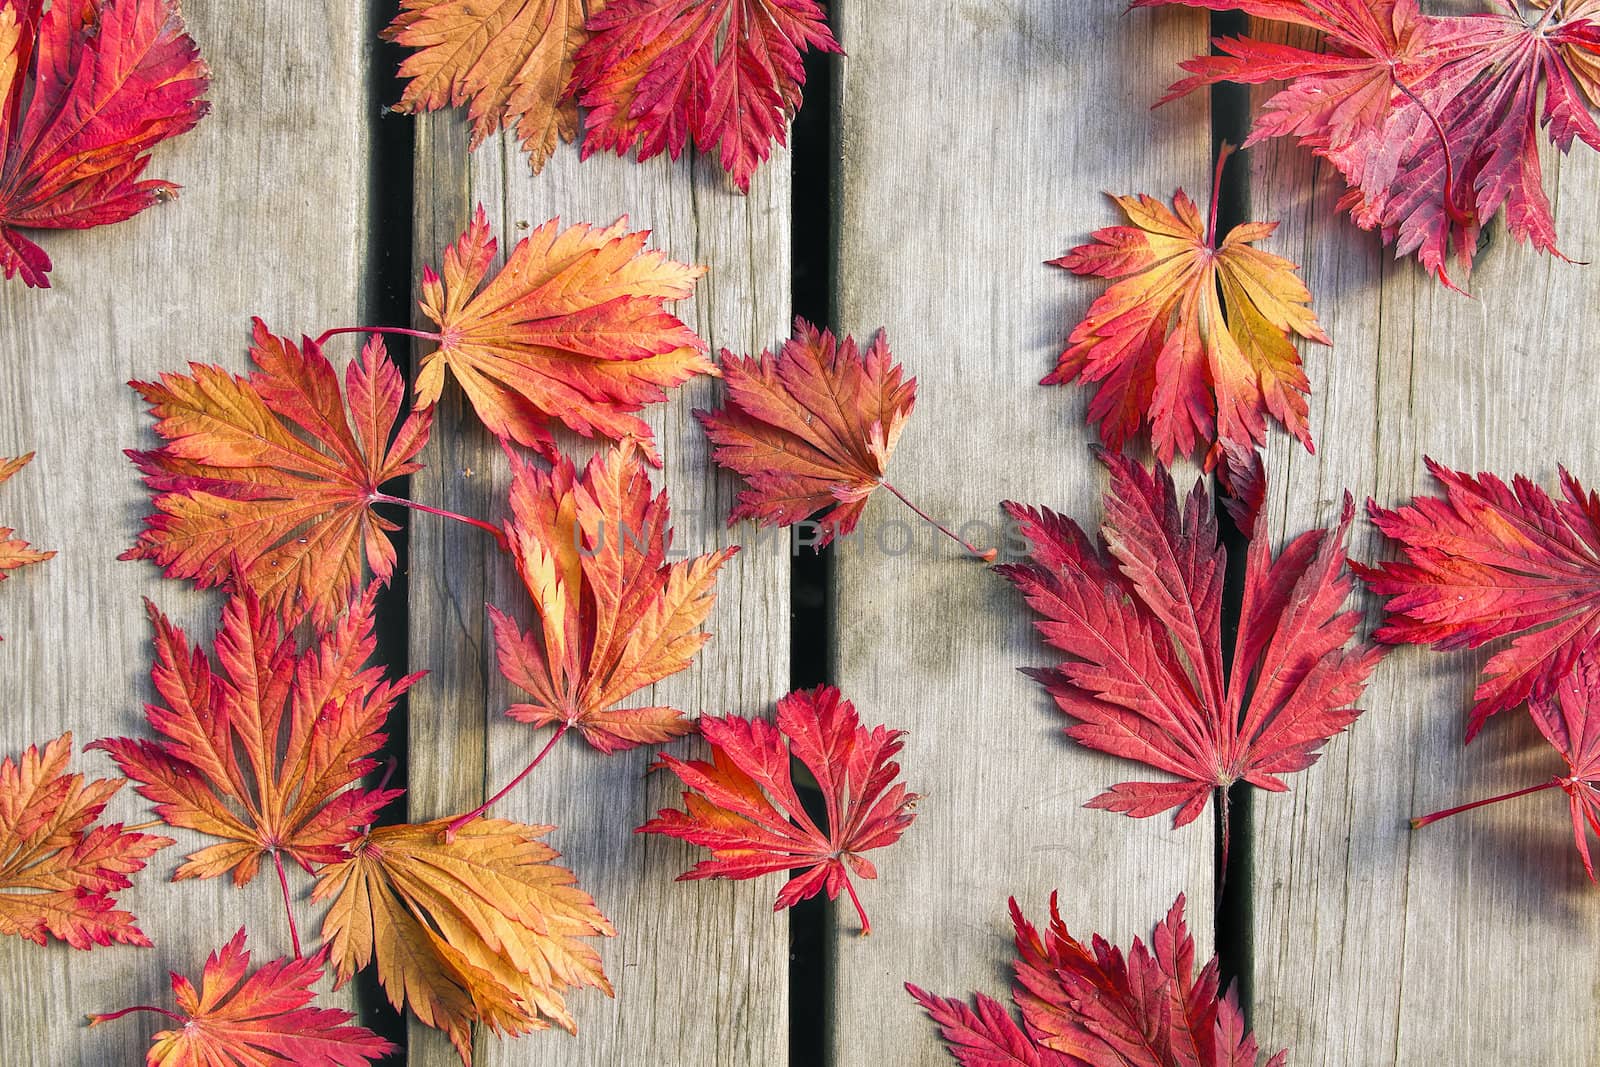 Japanese Maple Tree Leaves on Wood Deck by Davidgn